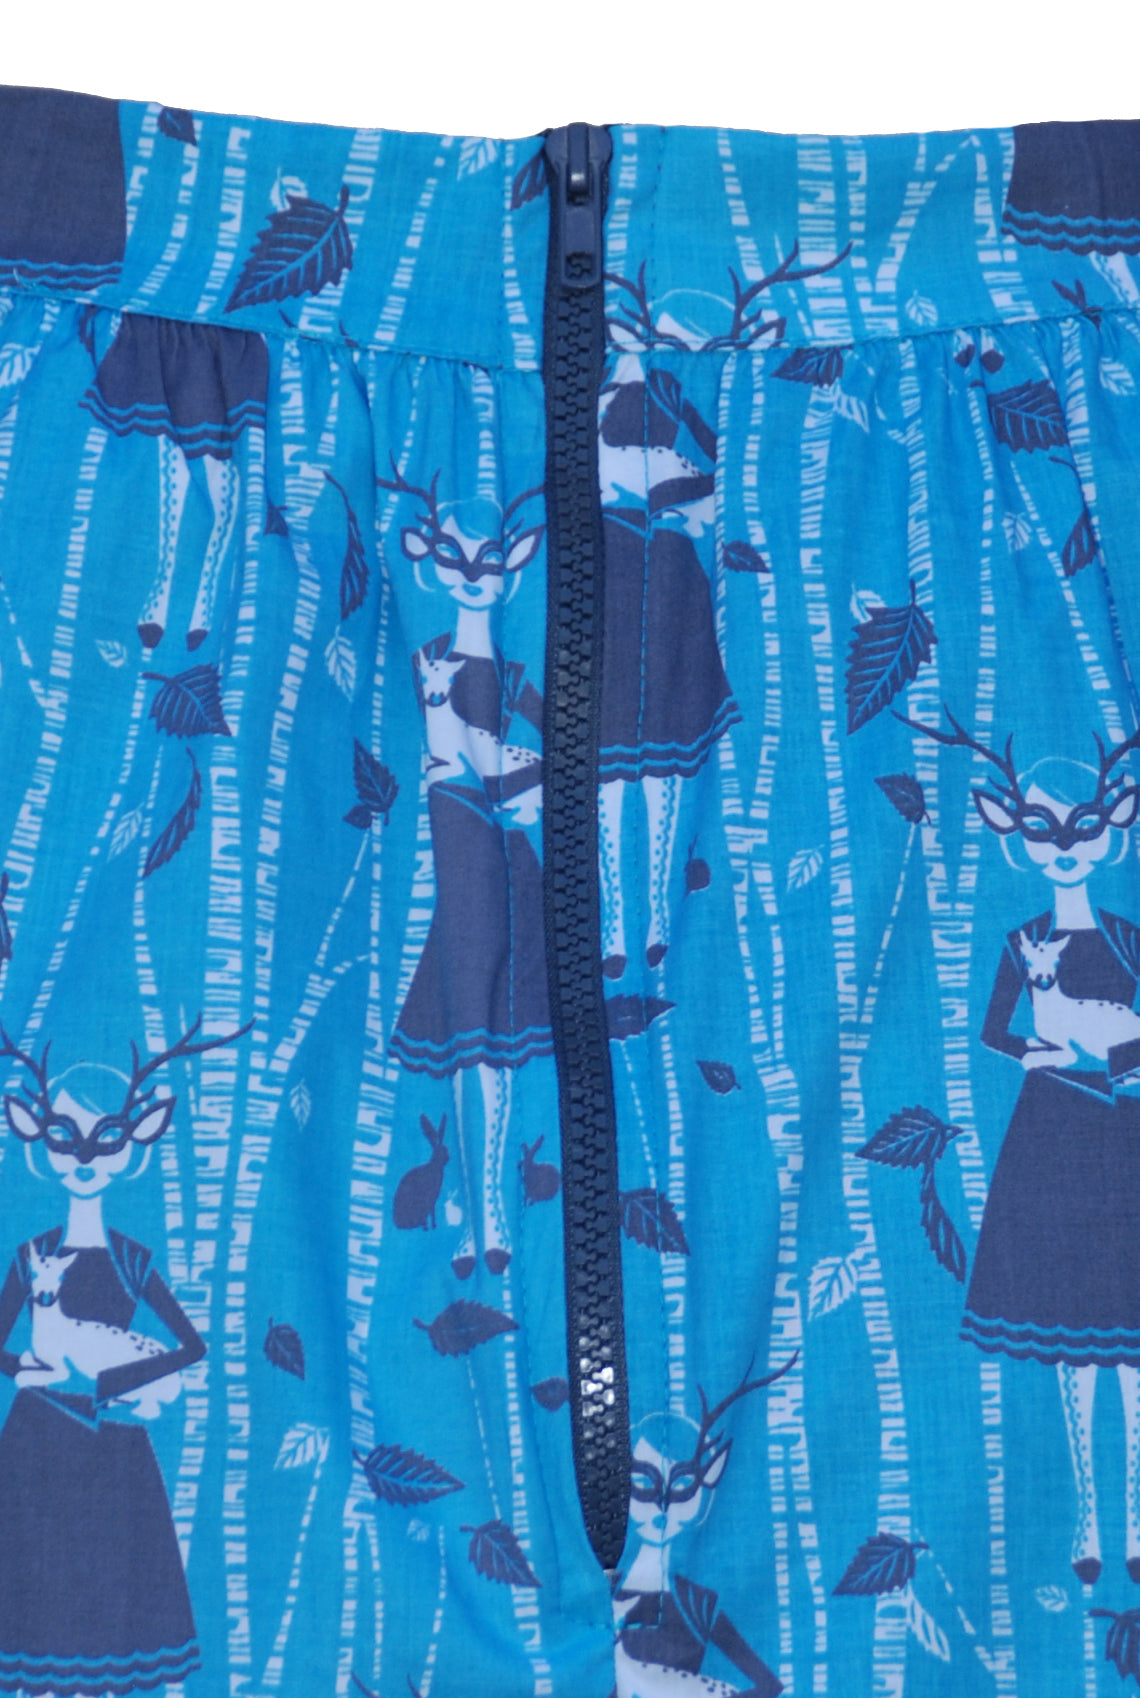 Back view of teal blue and grey gathered midi skirt with masked girl holding deer and birch trees with big zipper